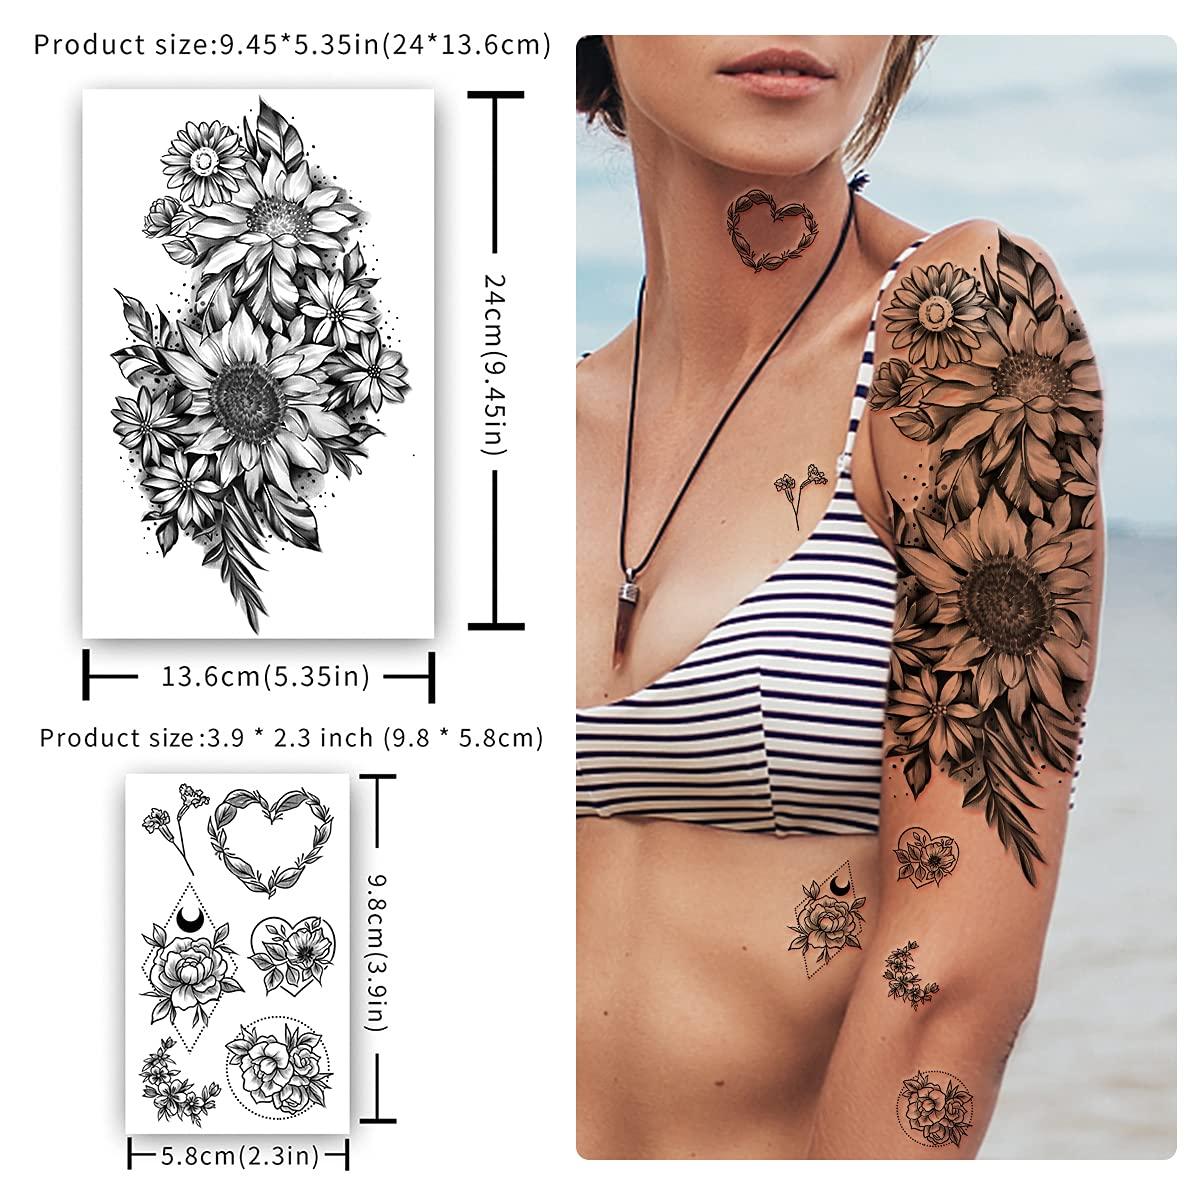 Yazhiji 56 Sheets Temporary Tattoos Stickers , 11 Sheets Half Arm Shoulder  Tattoos for Men or Women with 45 Sheets Tiny Fake Tattoo - Walmart.com